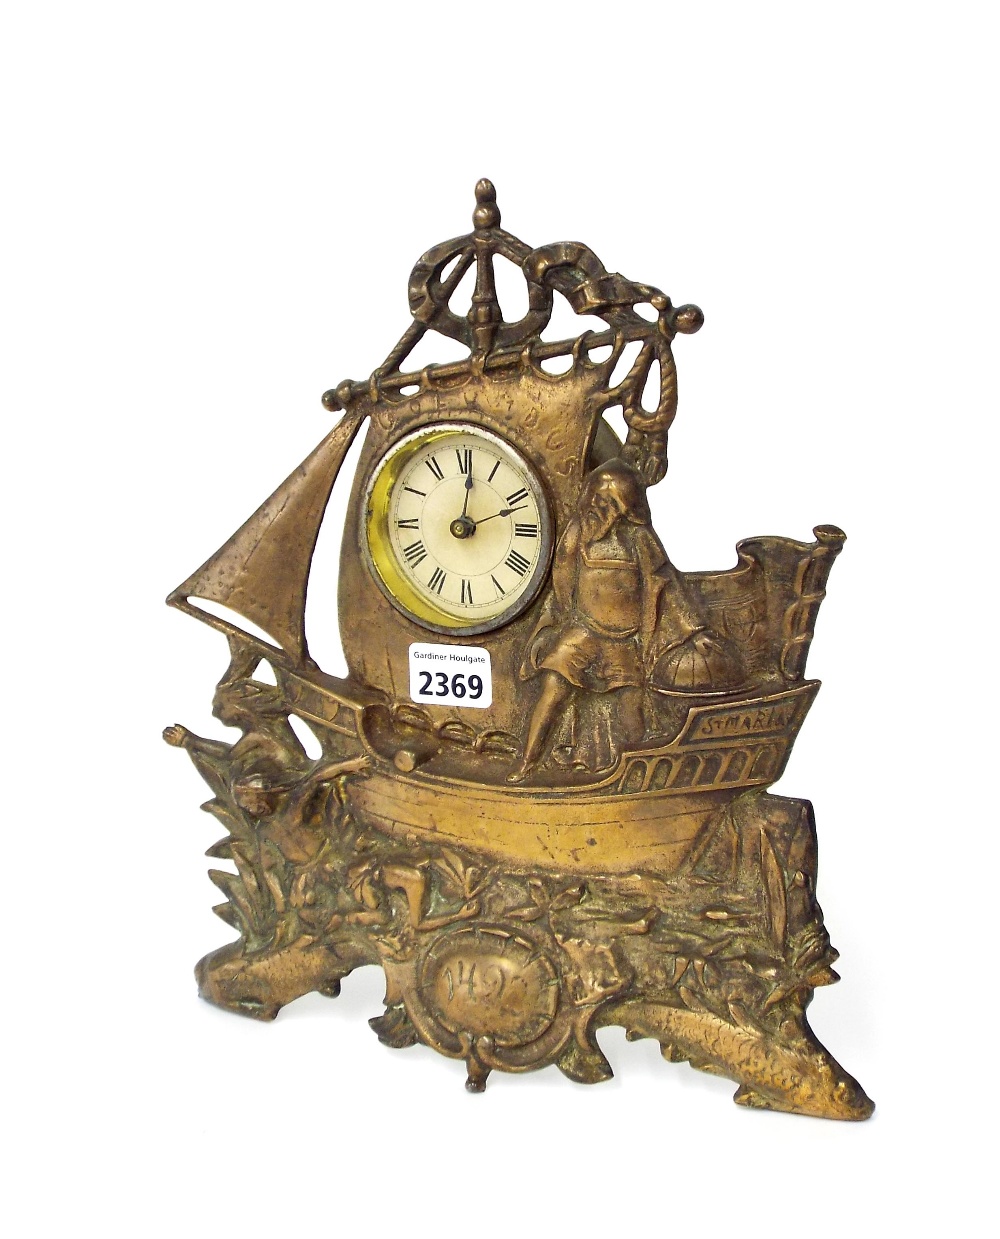 Commemorative novelty timepiece, the 2.5" dial set into the sail of a sailing ship mast to